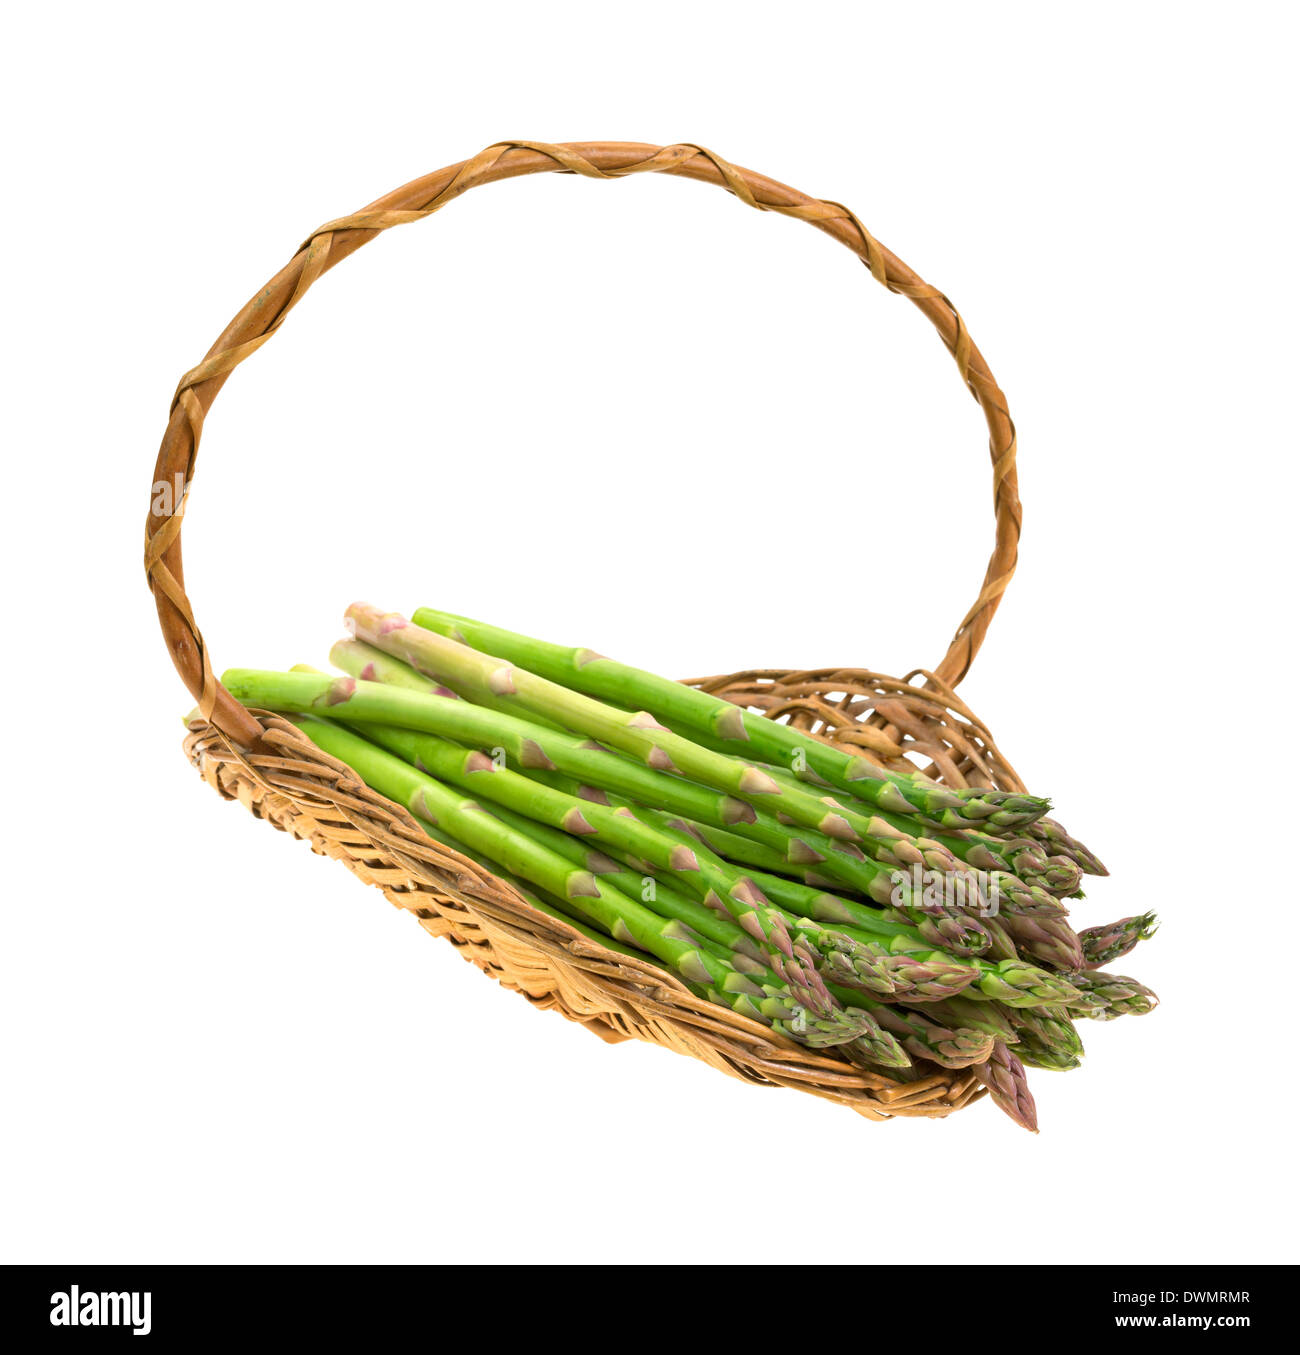 An old wicker basket with fresh asparagus stalks on a white background. Stock Photo